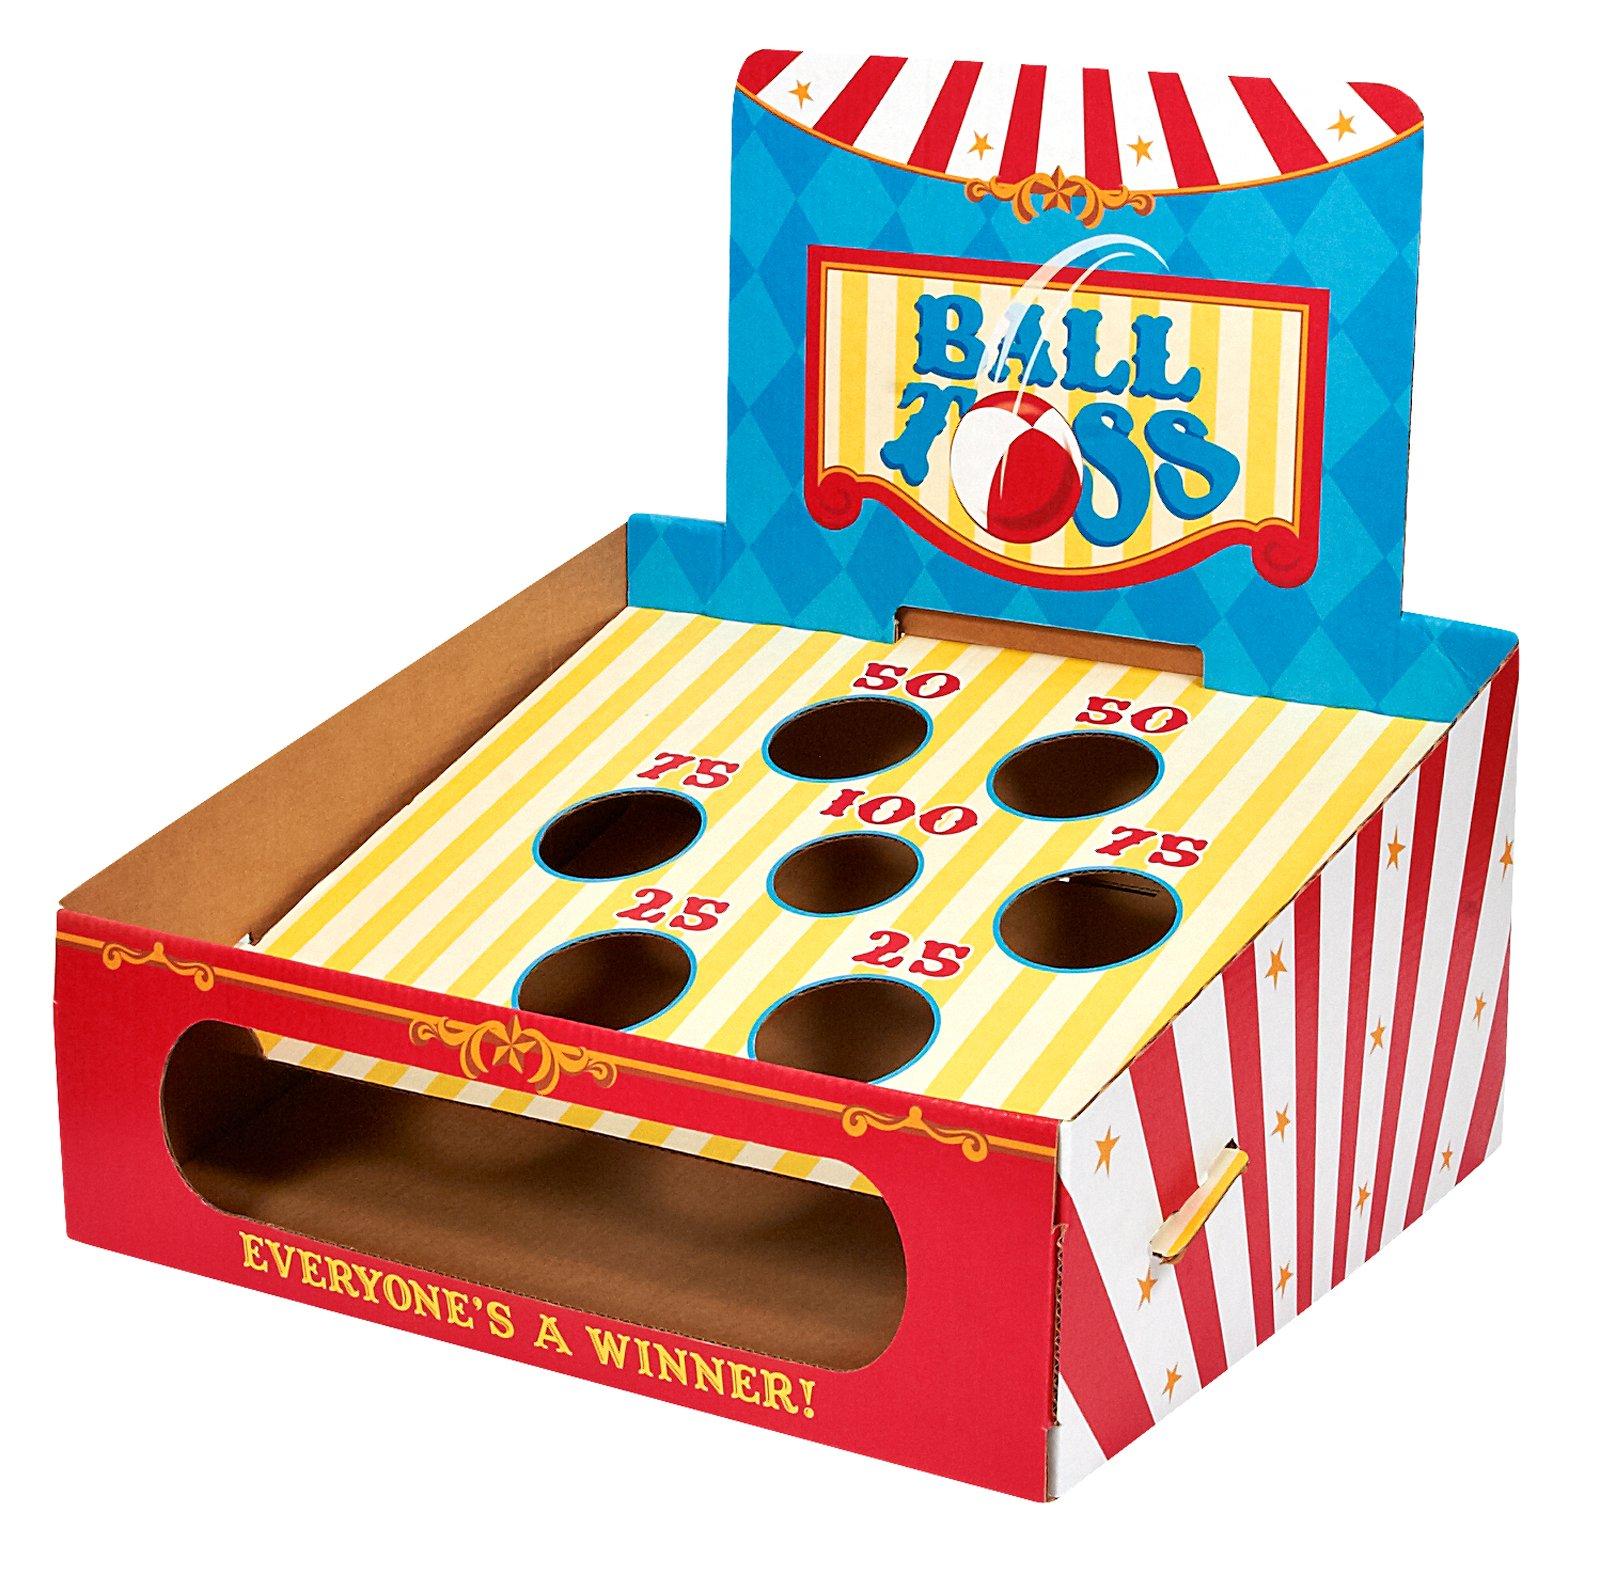 Ball toss carnival game clipart free clip art images